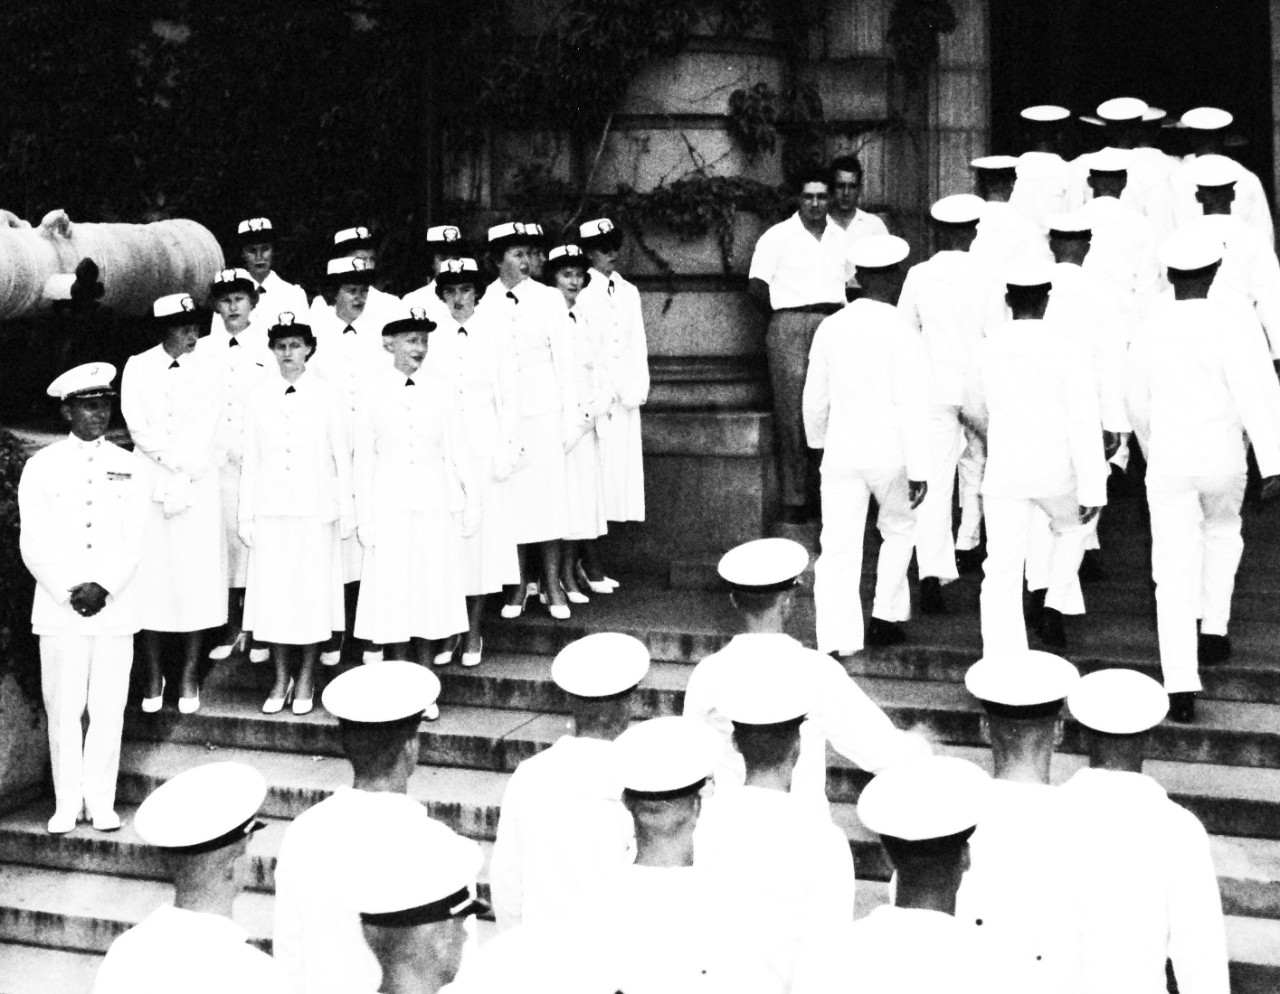 USN 708656:  WAVE guests at Annapolis, July 1952.  Thirteen WAVE officers of the group of eighty-five WAVES and ex-WAVES who visited the U.S. Naval Academy at Annapolis, Maryland, on July 27, 1952, receive the “march past” from a group of middies on the steps of Bancroft Hall.  Lieutenant Colonel Dale H. Heely, USMC, (left), of the faculty, was one of the escort officers to the visitors.  The group was guests of Vice Admiral Harry W. Hill, USN, Superintendent of the Academy, the faculty, and midshipmen students.  The visit was part of the celebration of the Tenth Anniversary of the WAVES inclusion as an official branch of the U.S. Navy.  Photograph released July 28, 1952.  Official U.S. Navy photograph, now in the collections of the National Archives.  